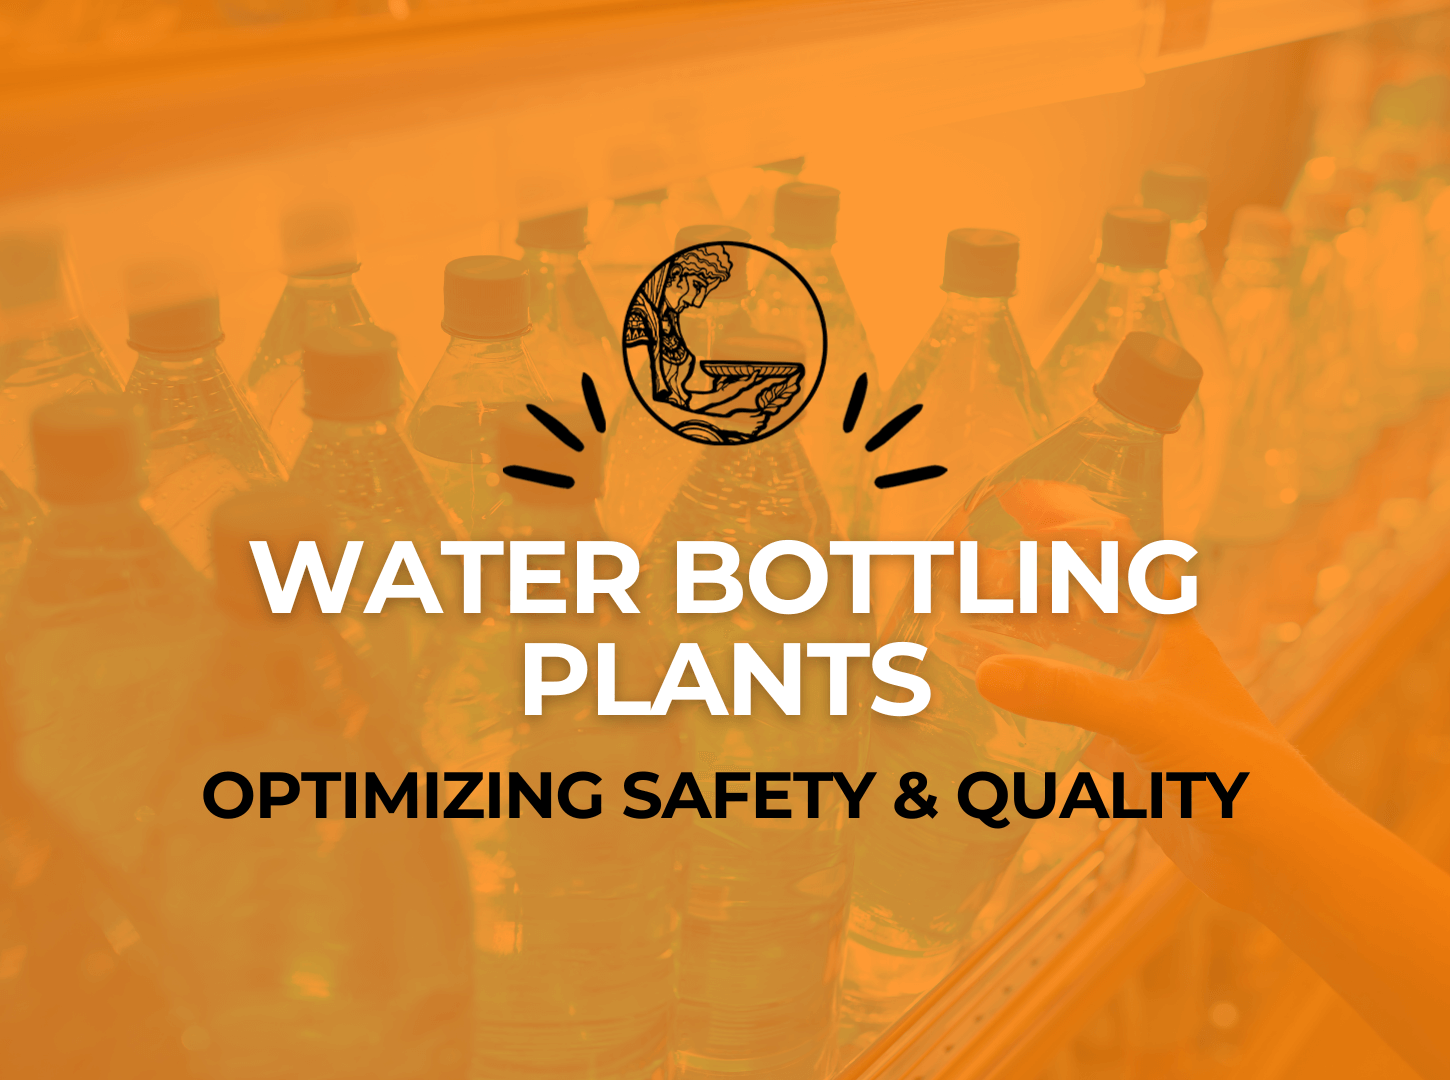 Optimizing Safety and Quality at Water Bottling Plants - Presage Analytics